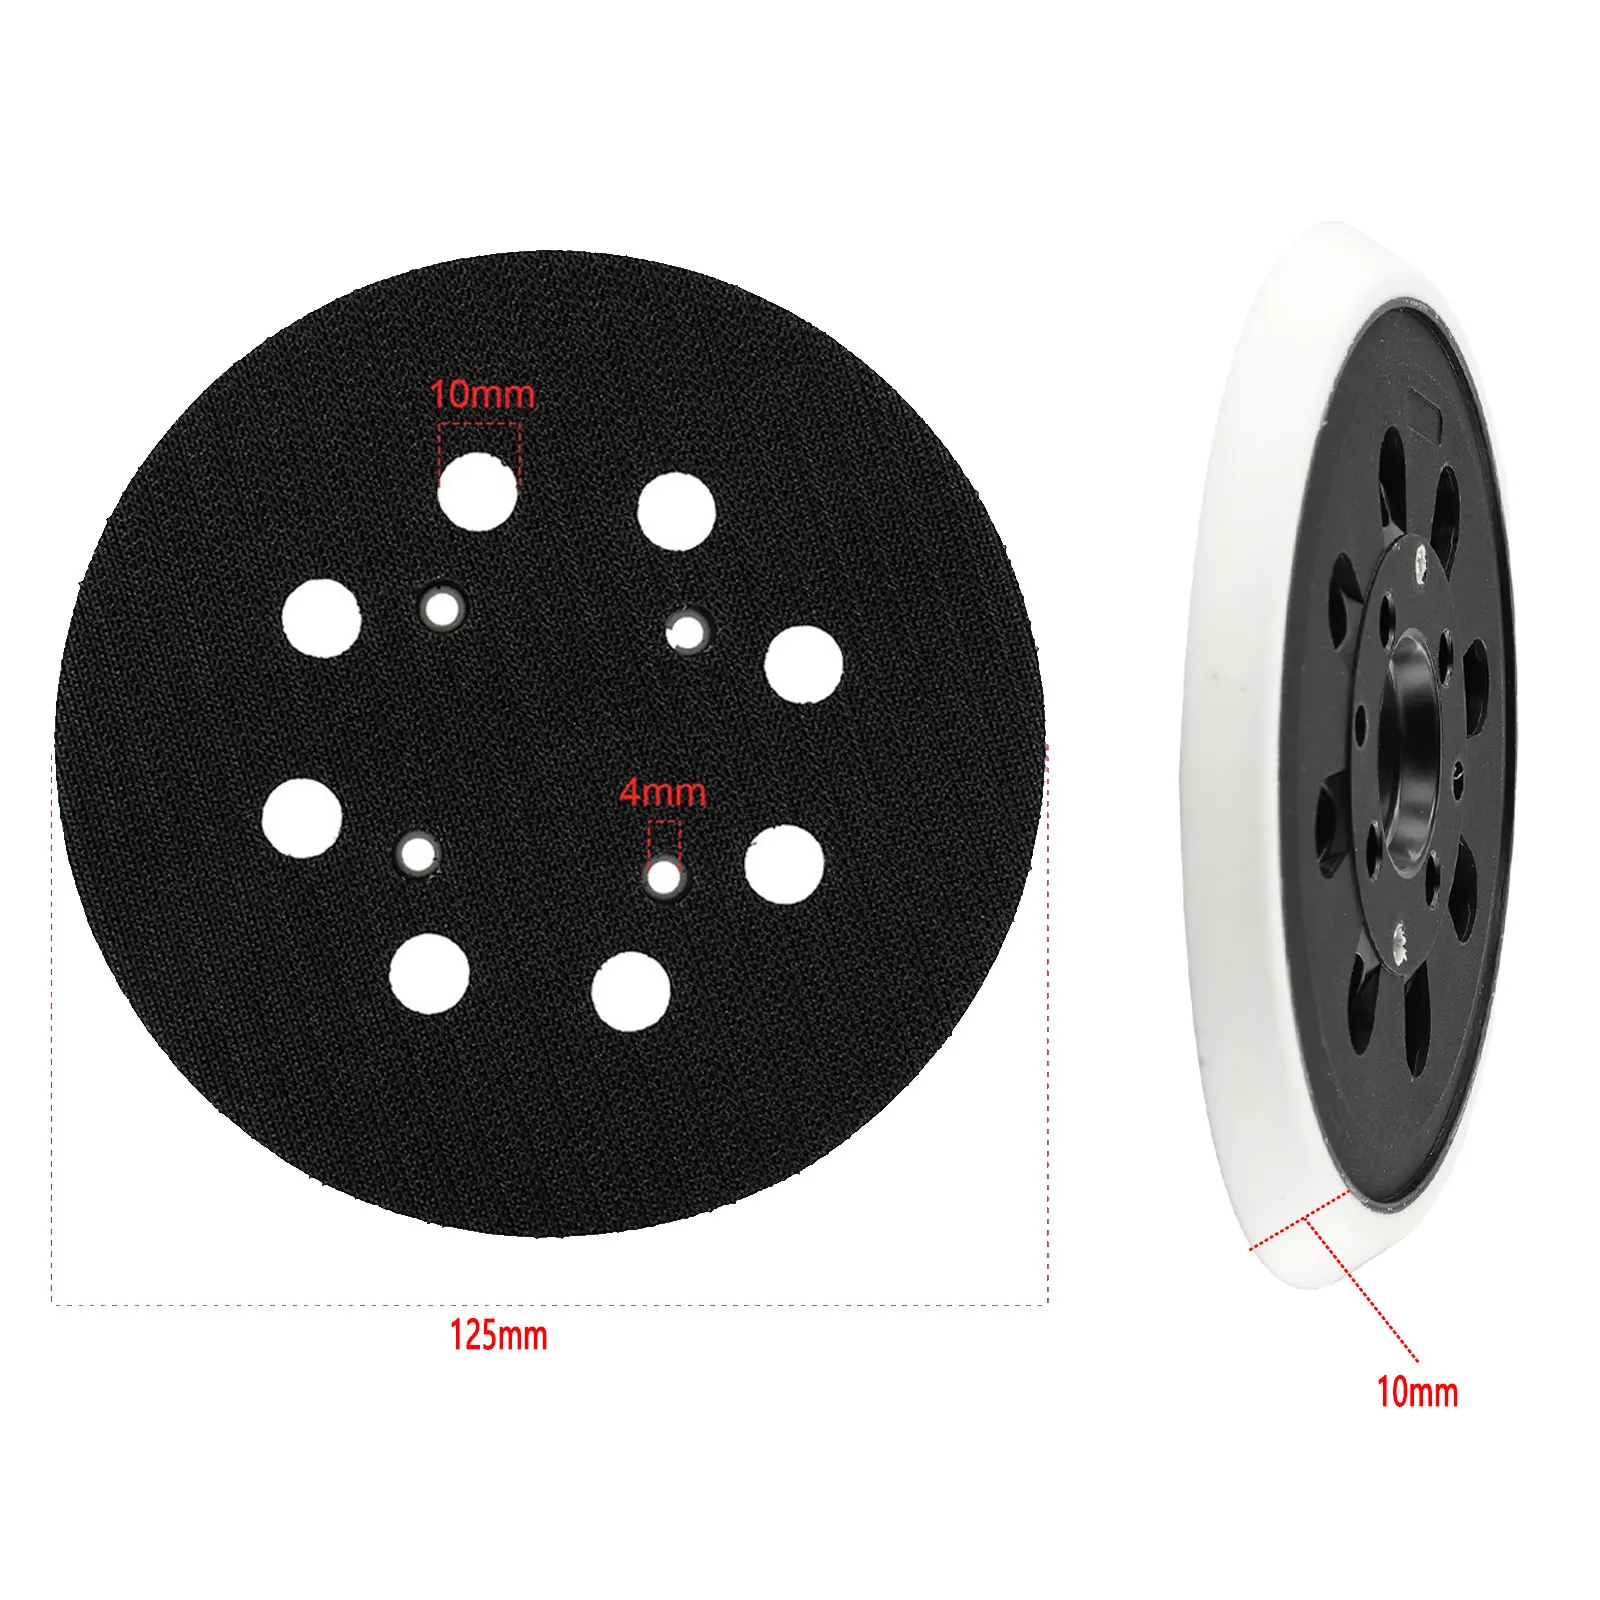 5 Inch 125mm Backing Pad Sanding Pad Hook&loop Connection For Bosch PEX 300 AE 400 AE 4000 AE Power Tools Accessories водонагреватель bosch gwh therm 4000 o wr10 2 p23 7701331615